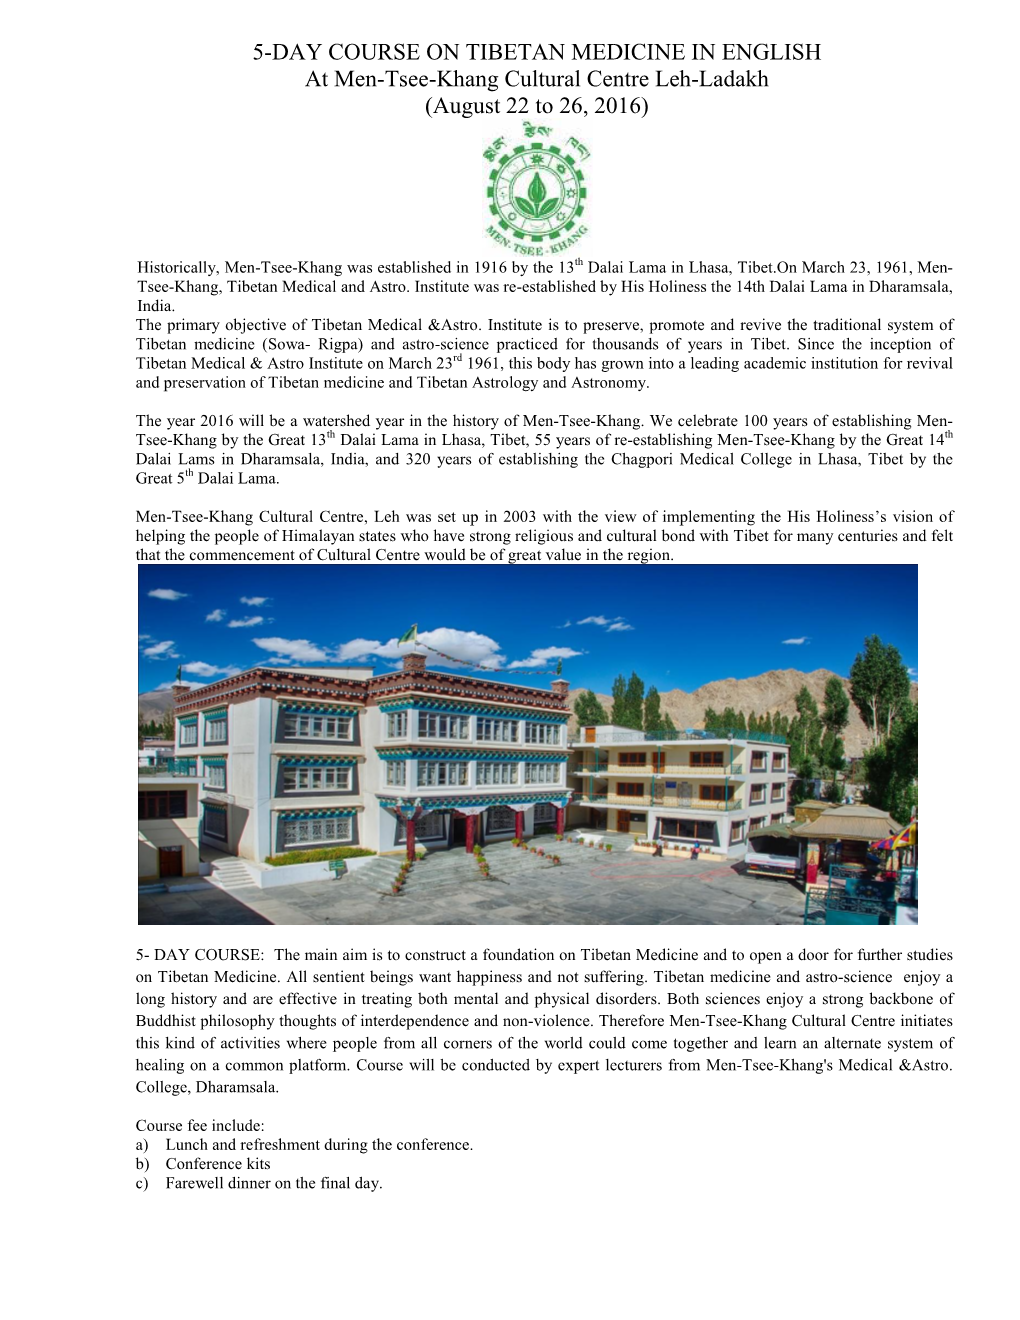 5-DAY COURSE on TIBETAN MEDICINE in ENGLISH at Men-Tsee-Khang Cultural Centre Leh-Ladakh (August 22 to 26, 2016)